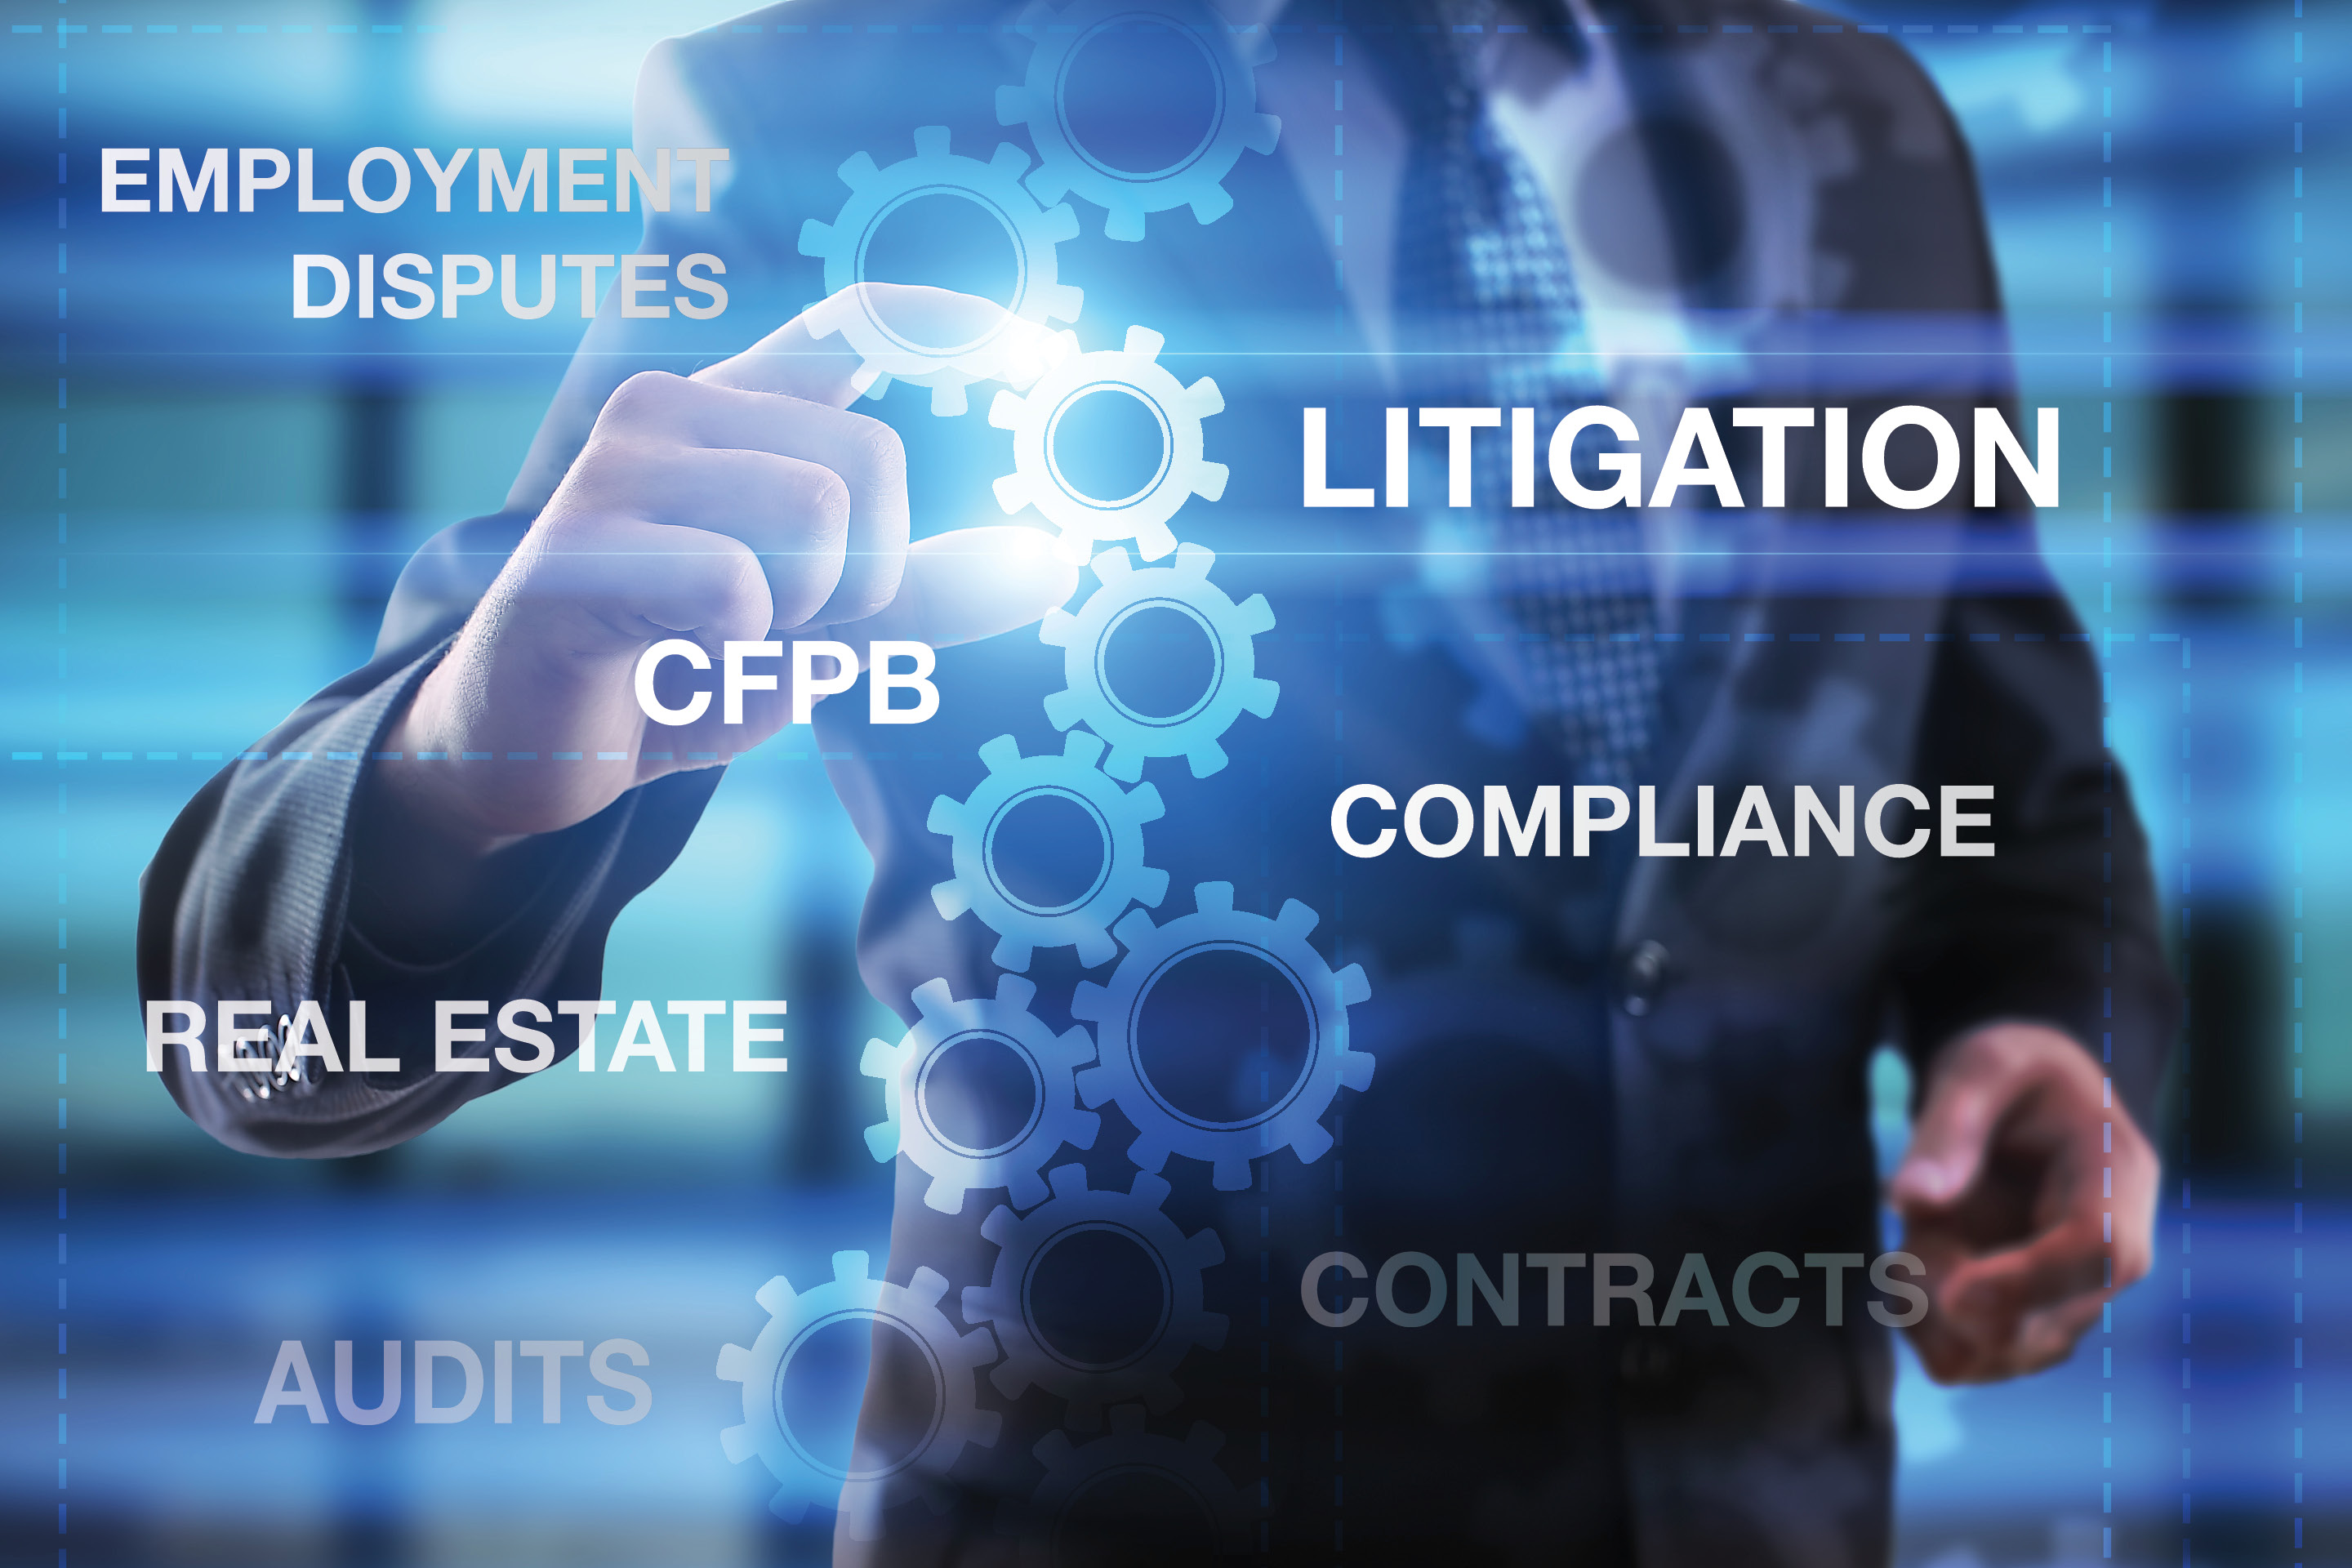 1cfpb-contracts-employment-disputes-real-estate-litigation-or-legal-mortgage-attorneys2-jpg